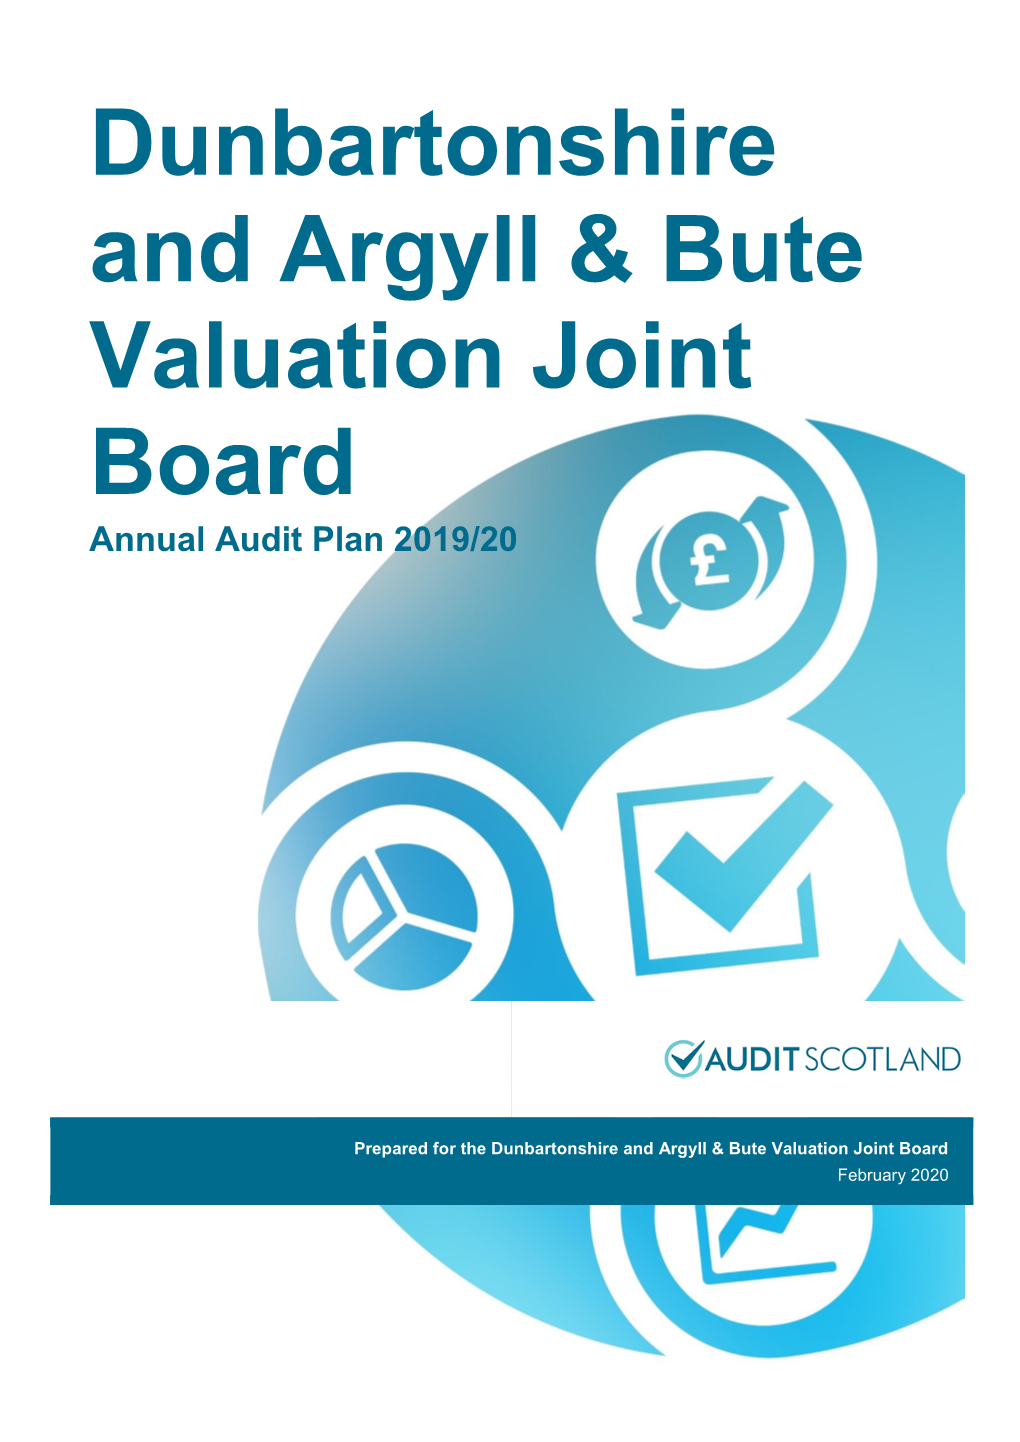 Dunbartonshire and Argyll & Bute Valuation Joint Board Annual Audit